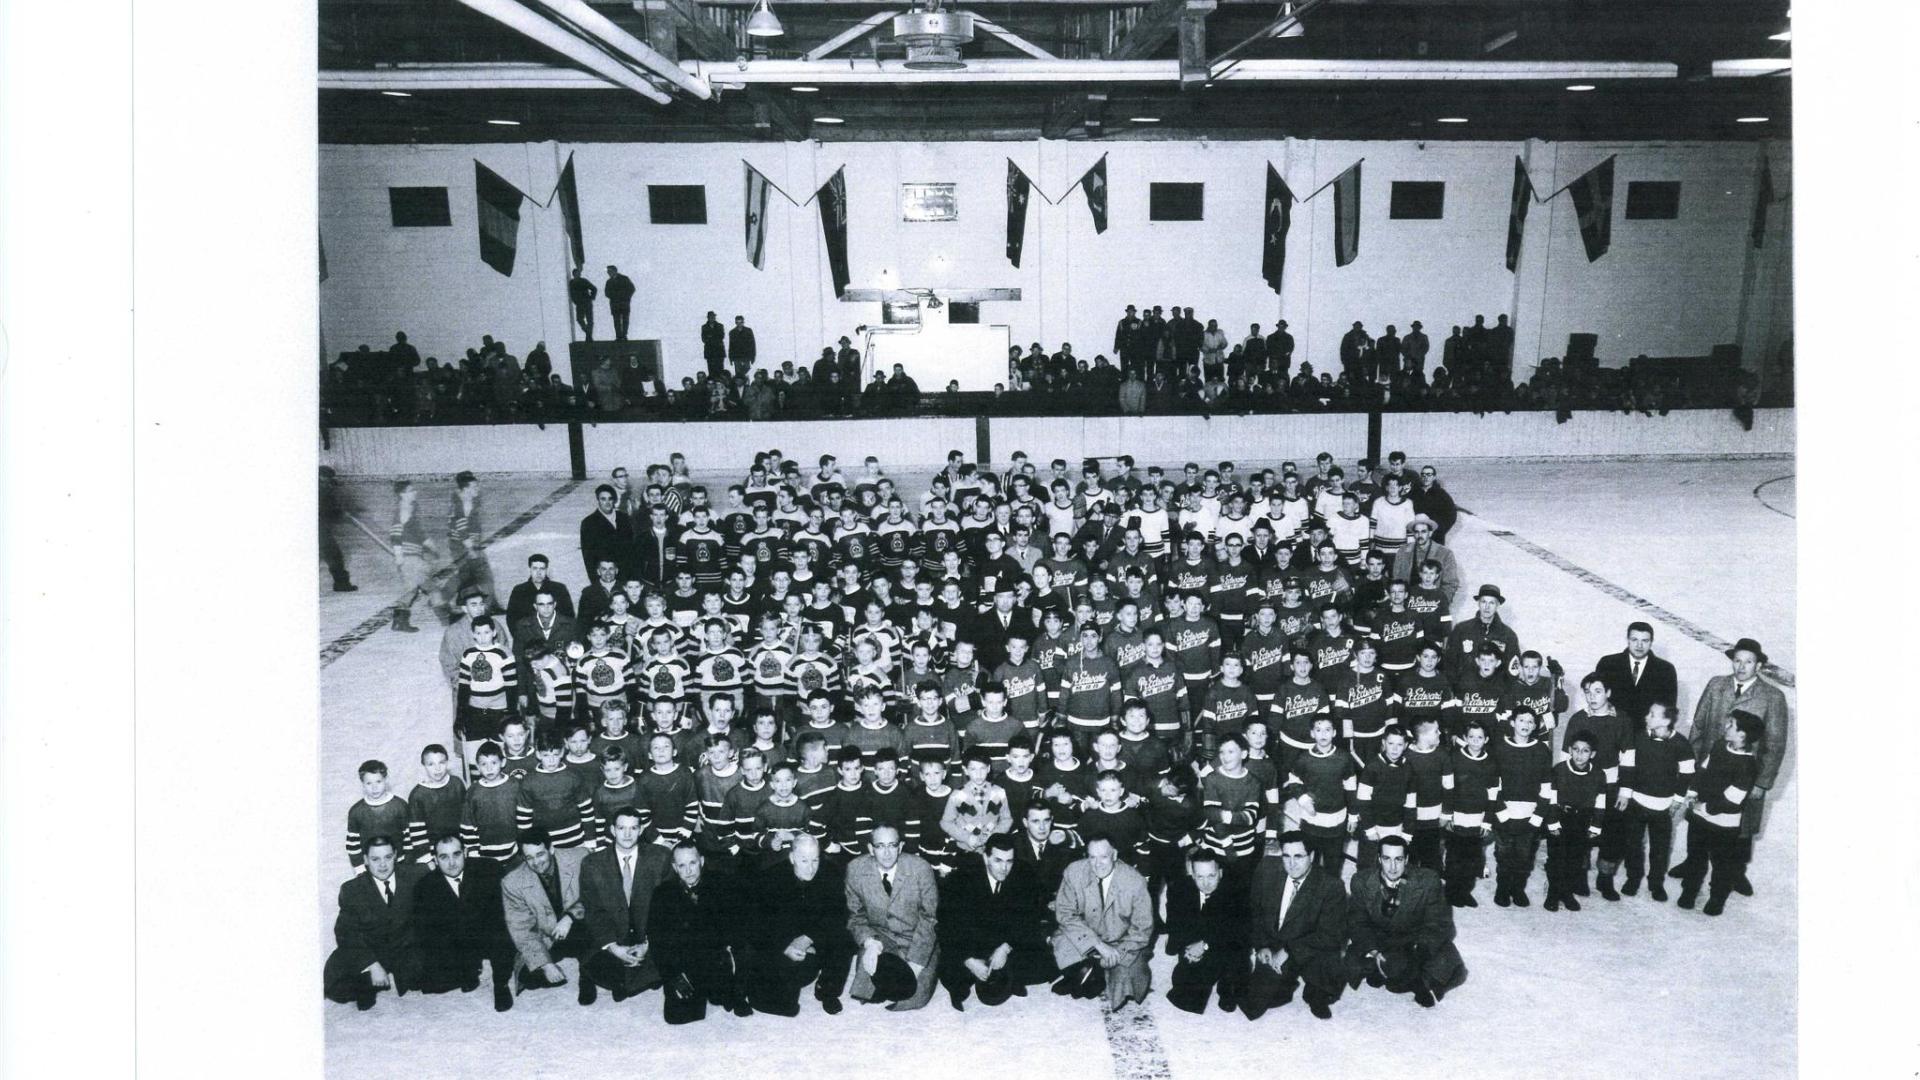 Group photo of hockey teams incide an ice rink. The photograph is black and white.